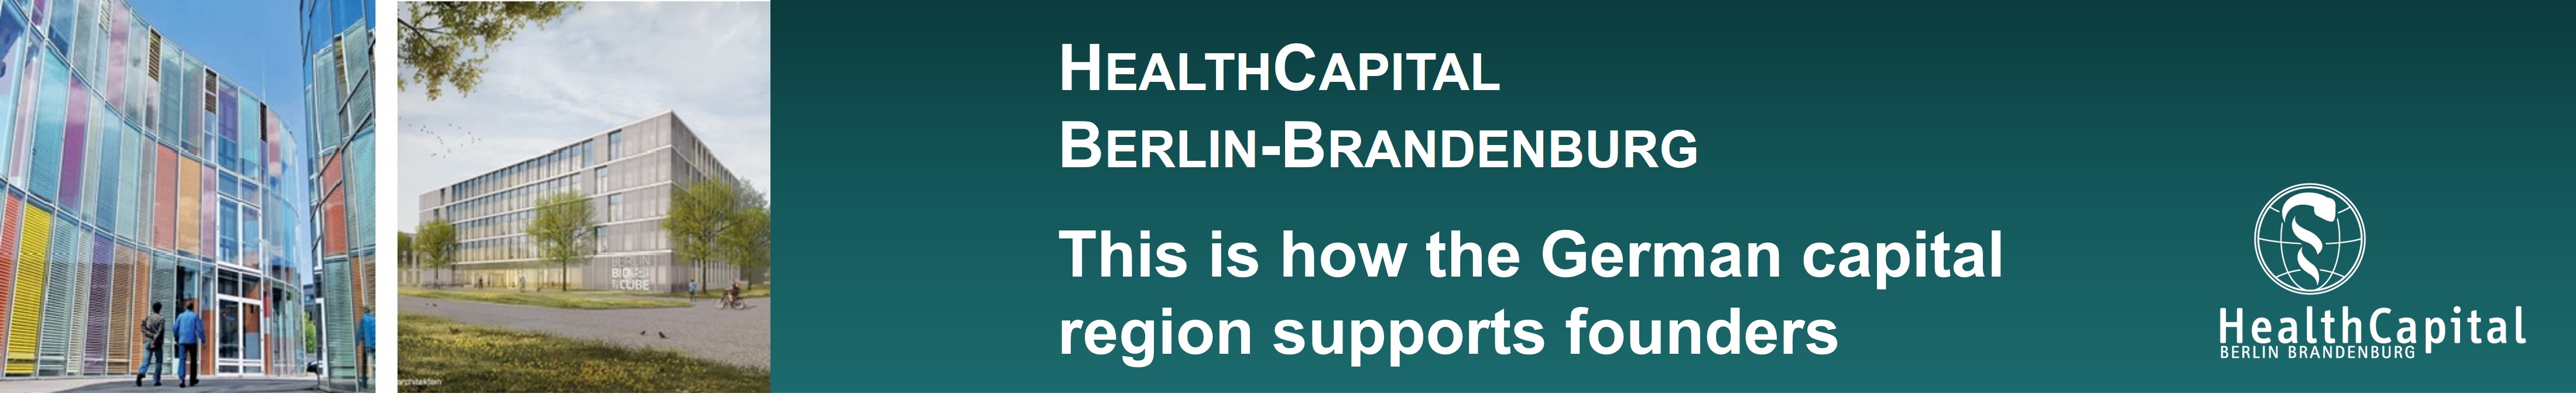 Picture Berlin Partner HealthCapital Supports Founders 650x100px